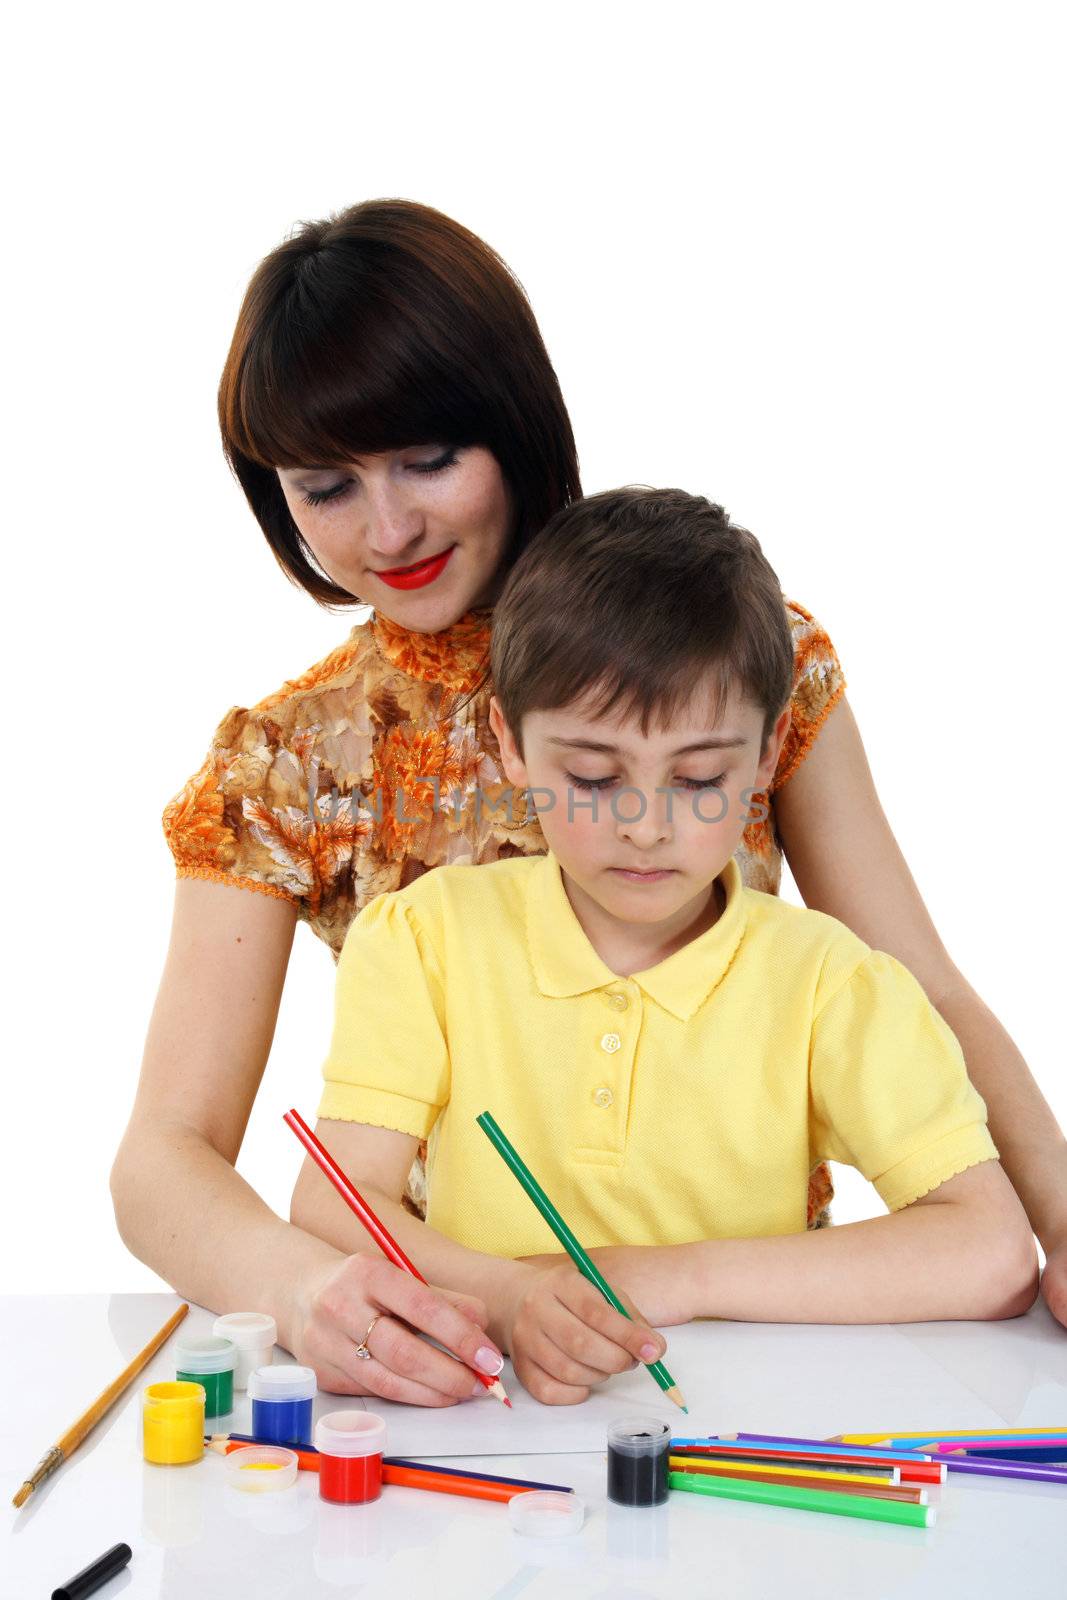 small boy and a young girl with colored pencils on the white background
